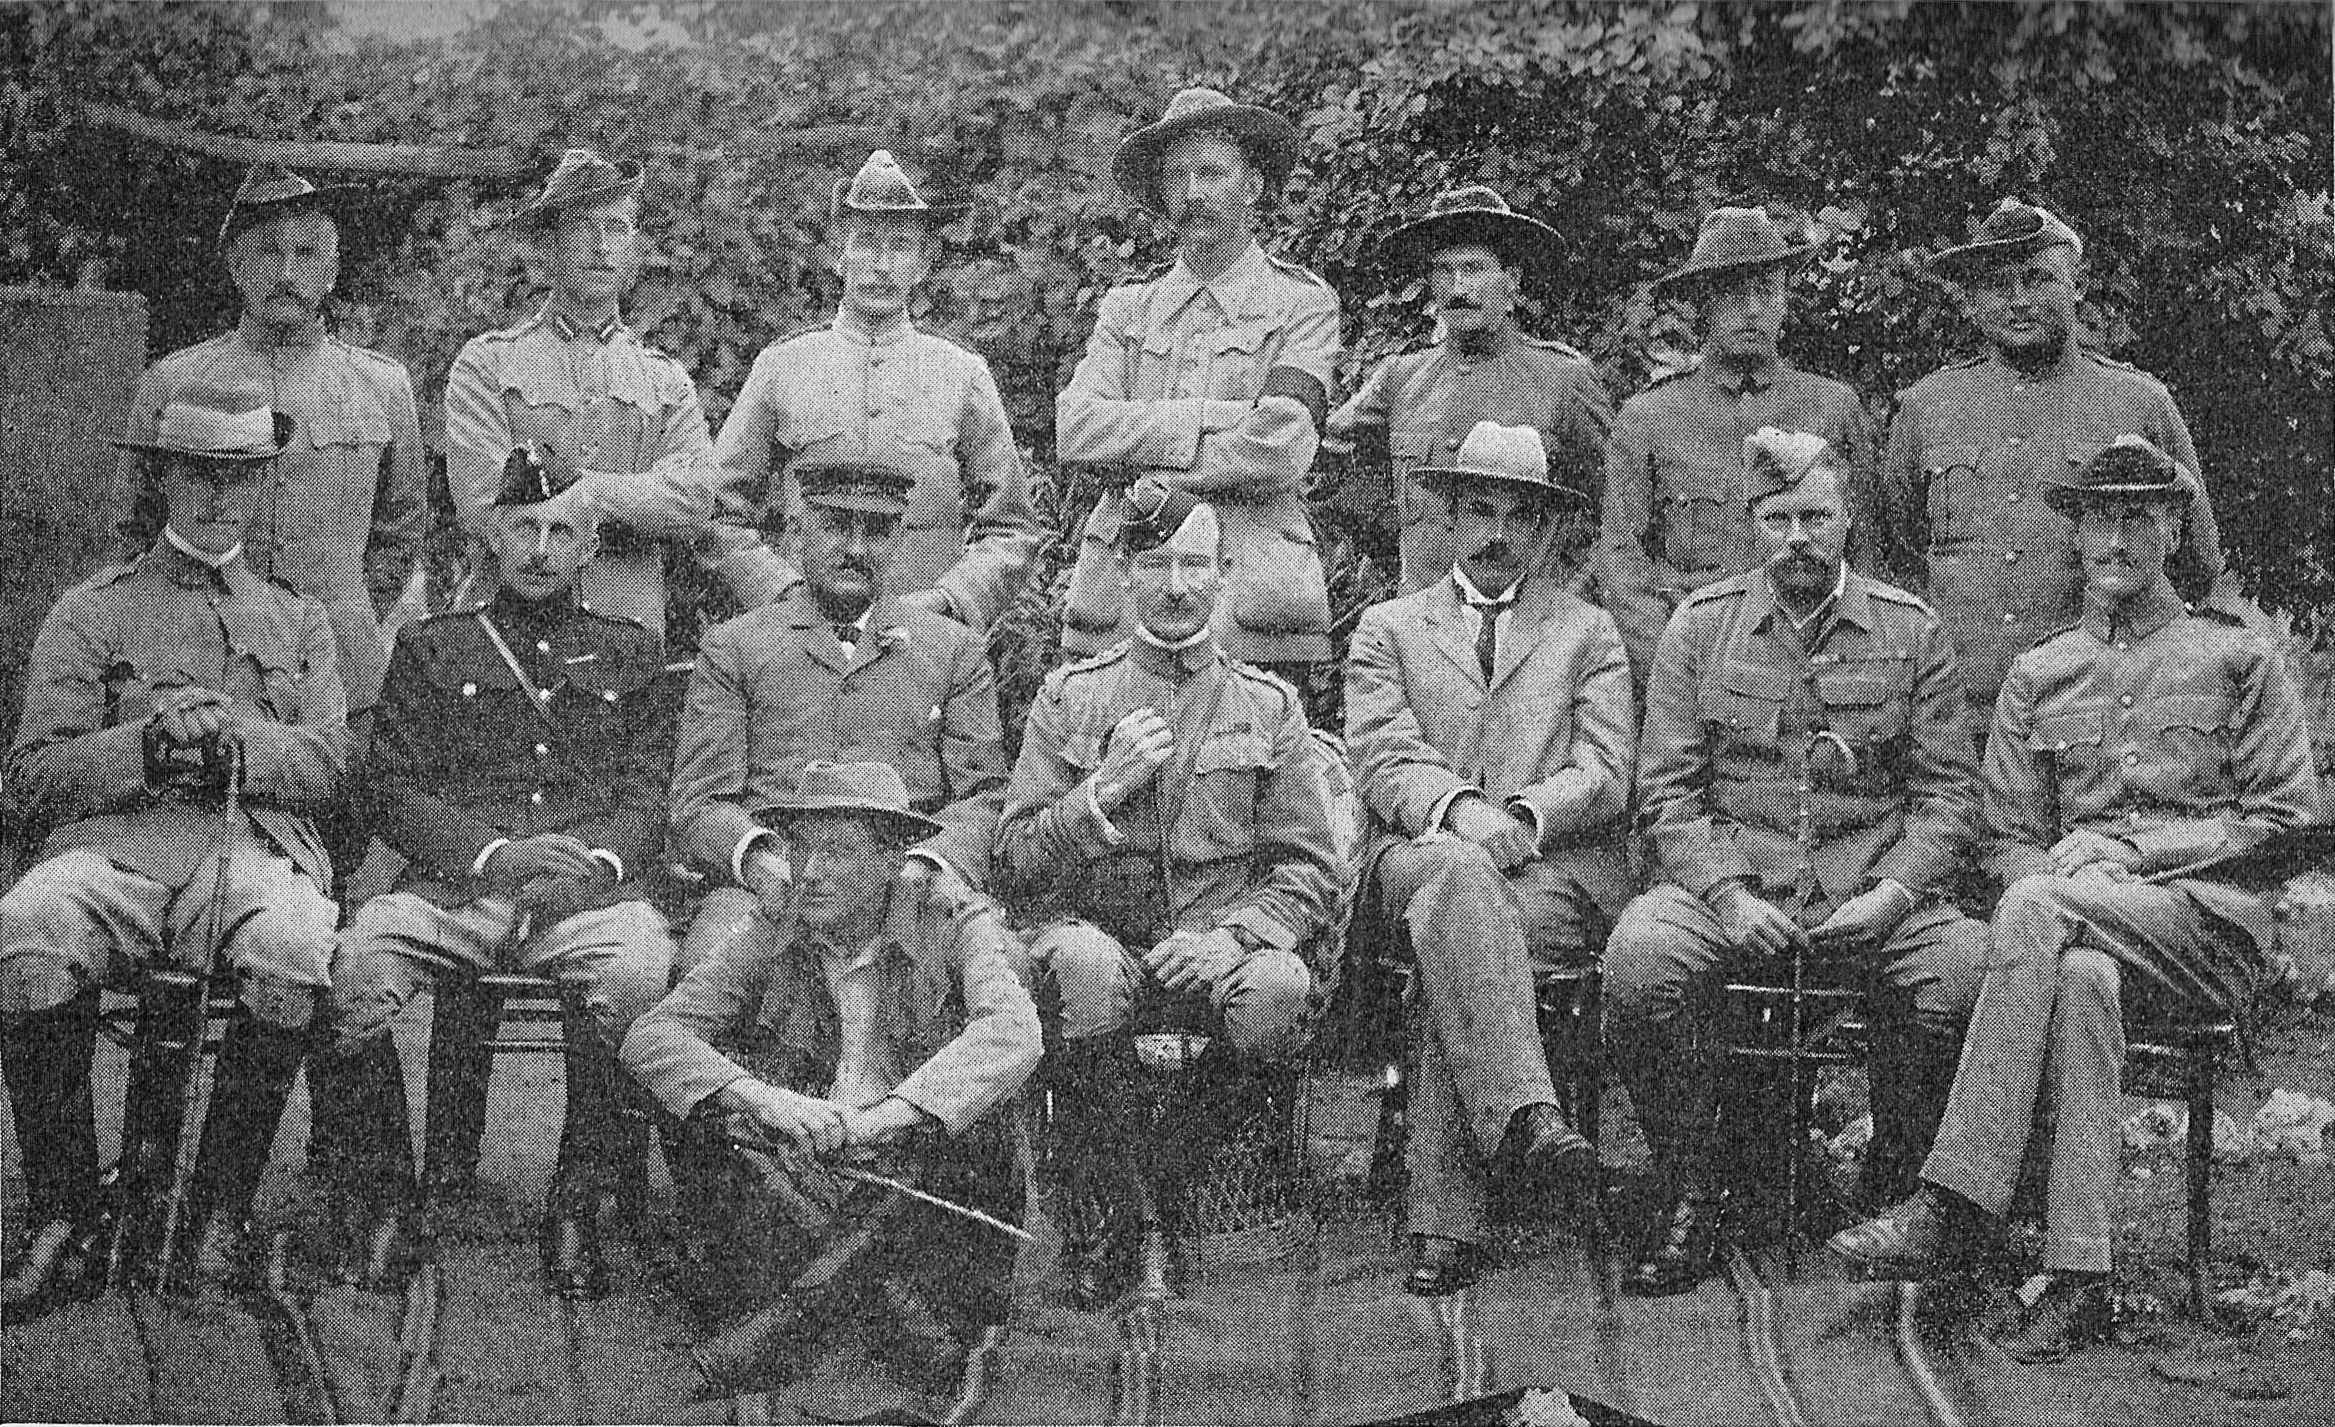 Colonel Robert Baden Powell with his staff at Mafeking during the Anglo Boer War